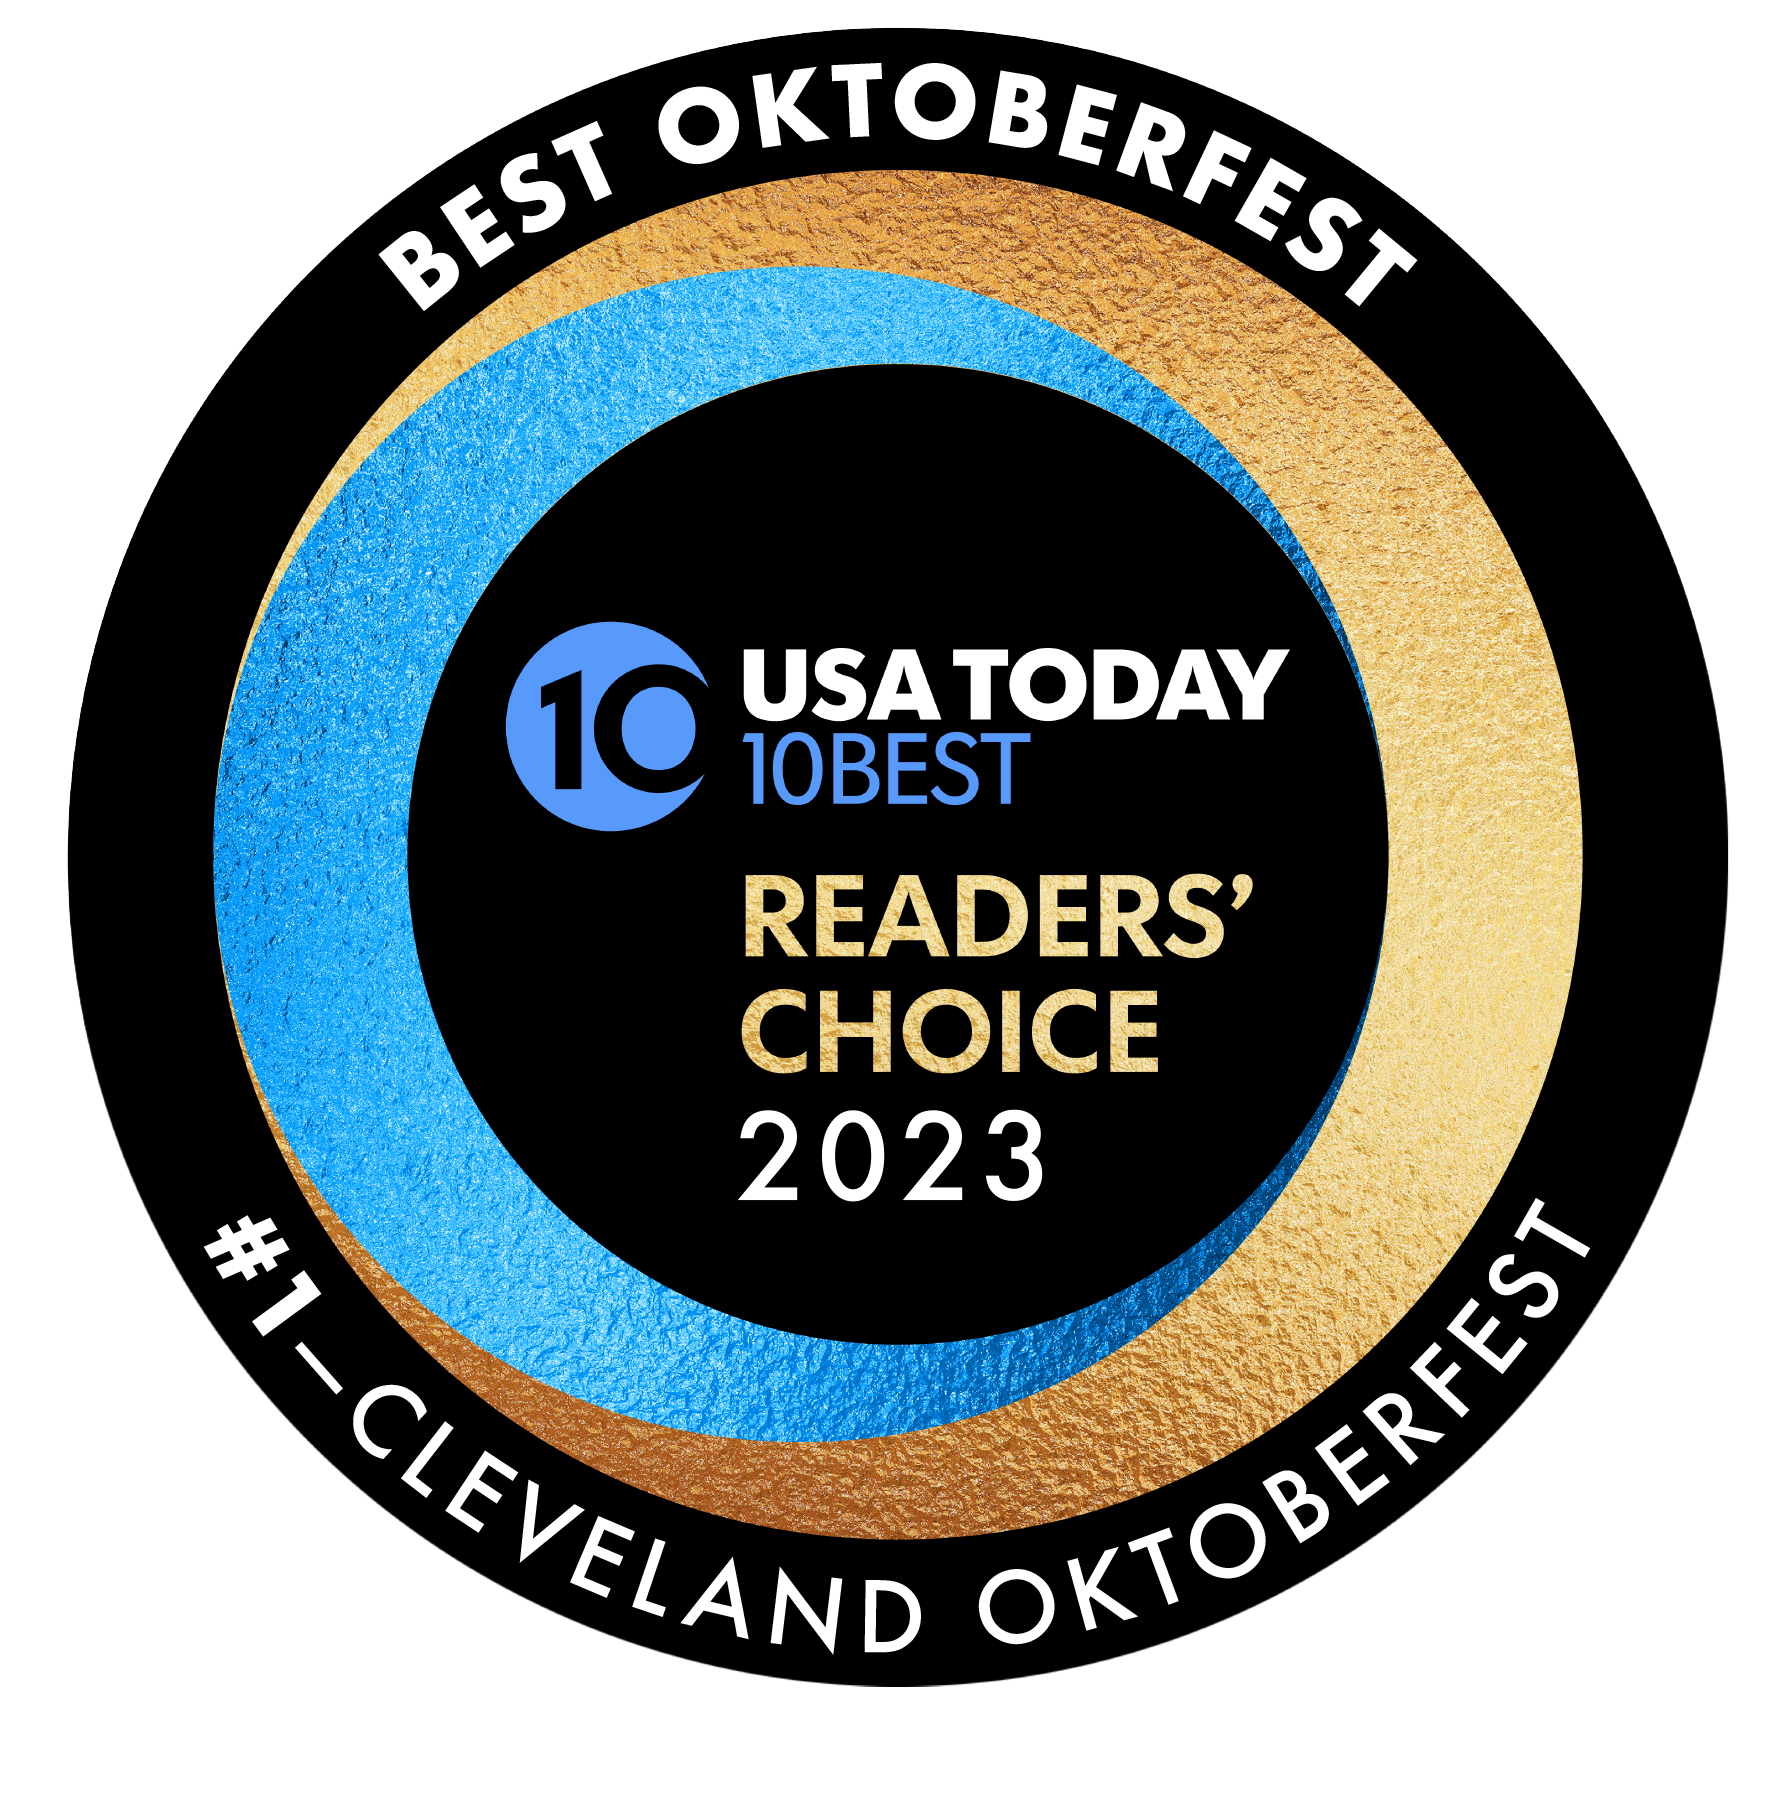 Cleveland Oktoberfest Named Best Oktoberfest in the Nation in USA Today's 10 Best Poll